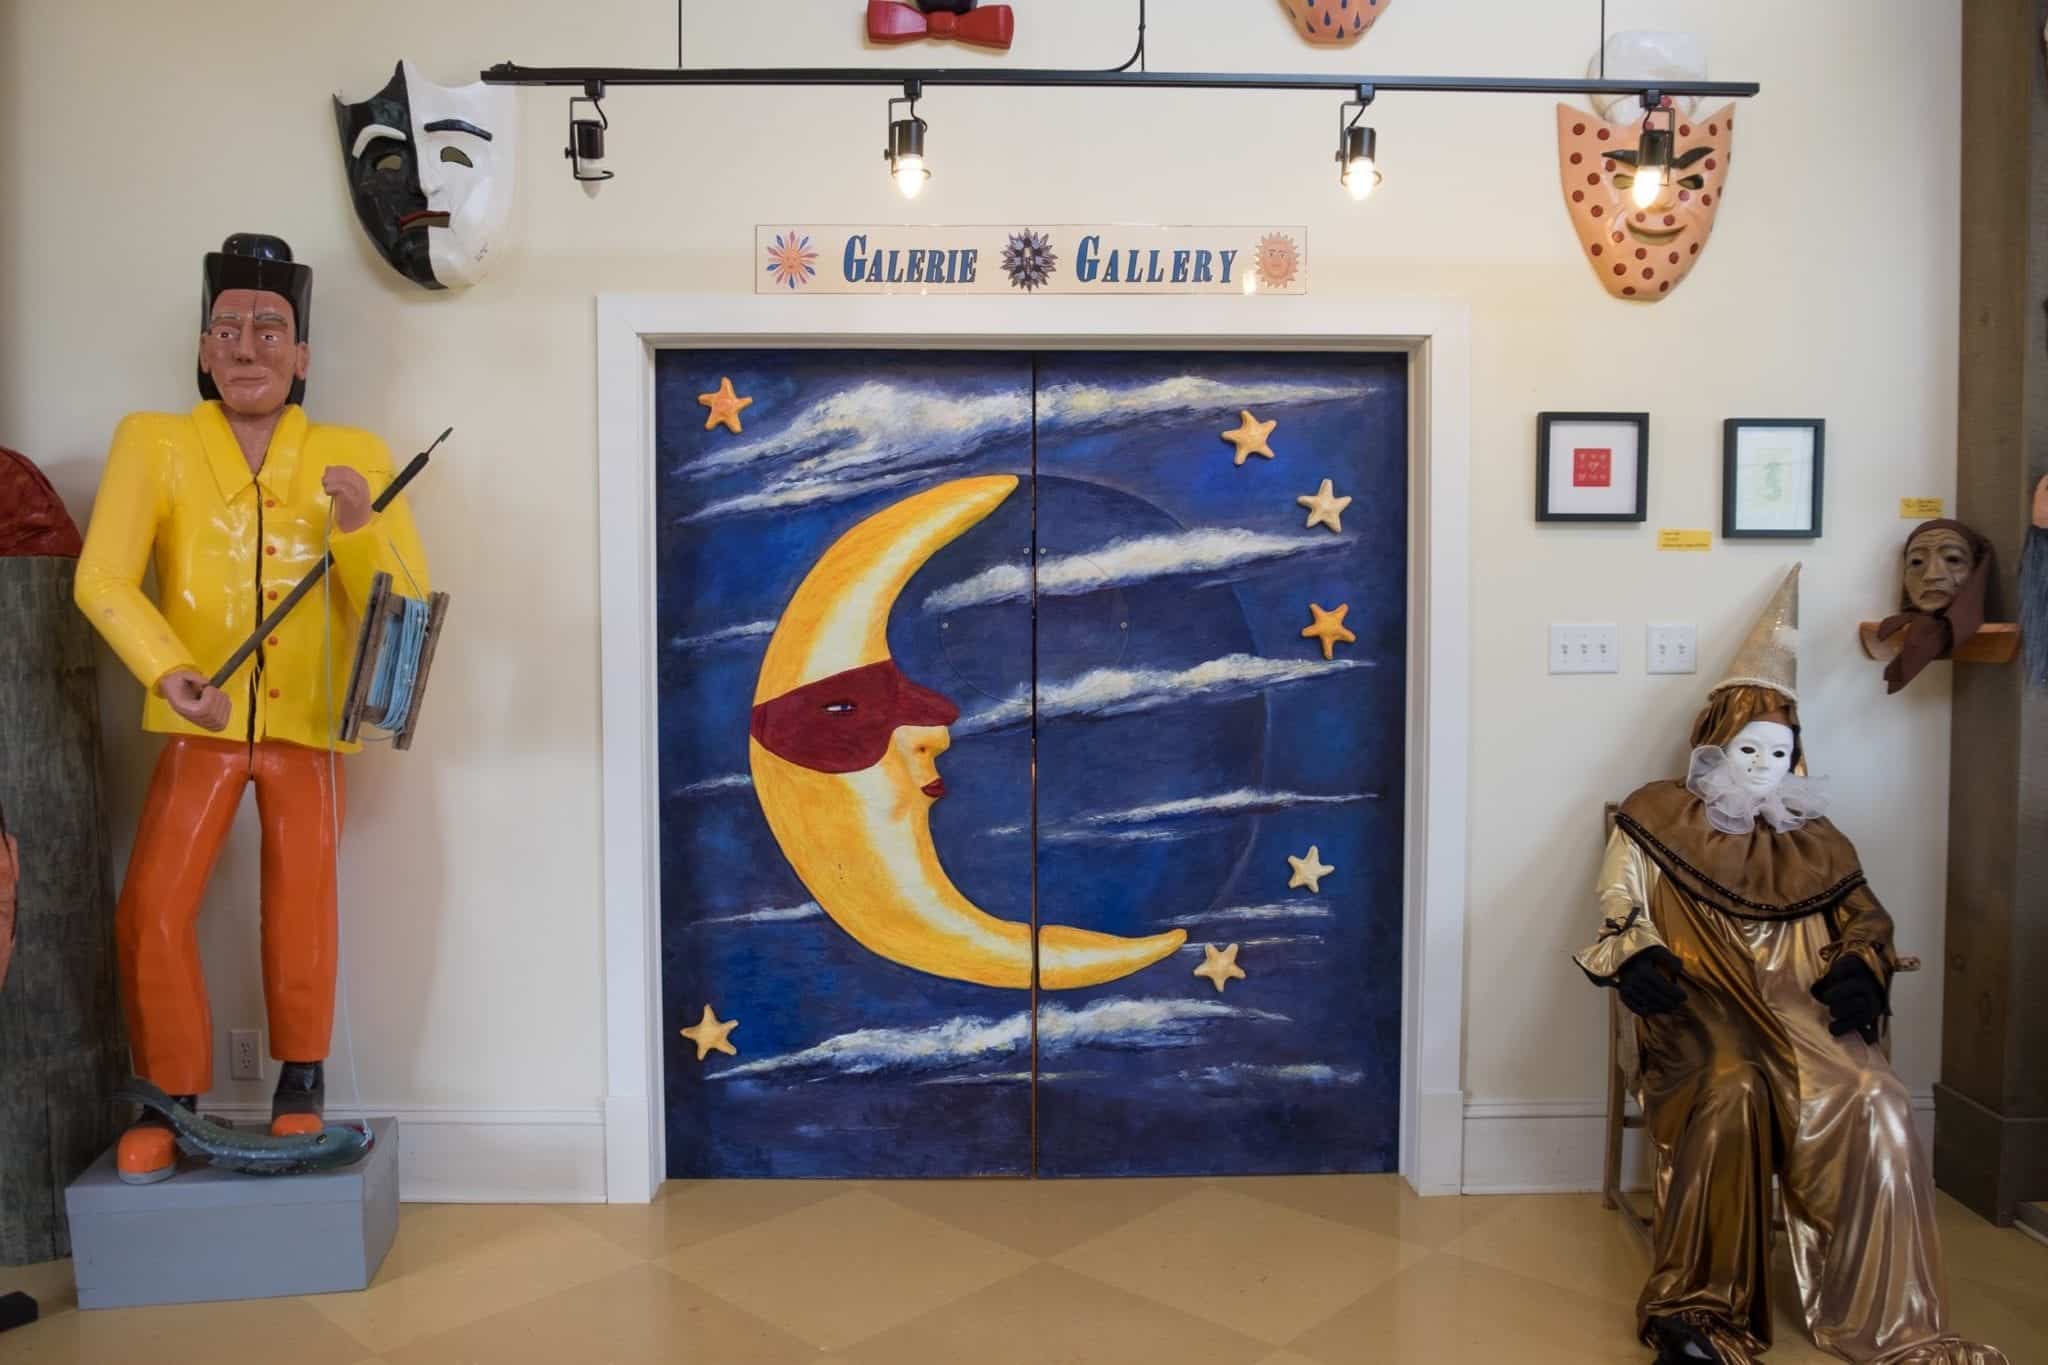 Elevator doors with a blue night sky and quarter moon wearing a mask painting on